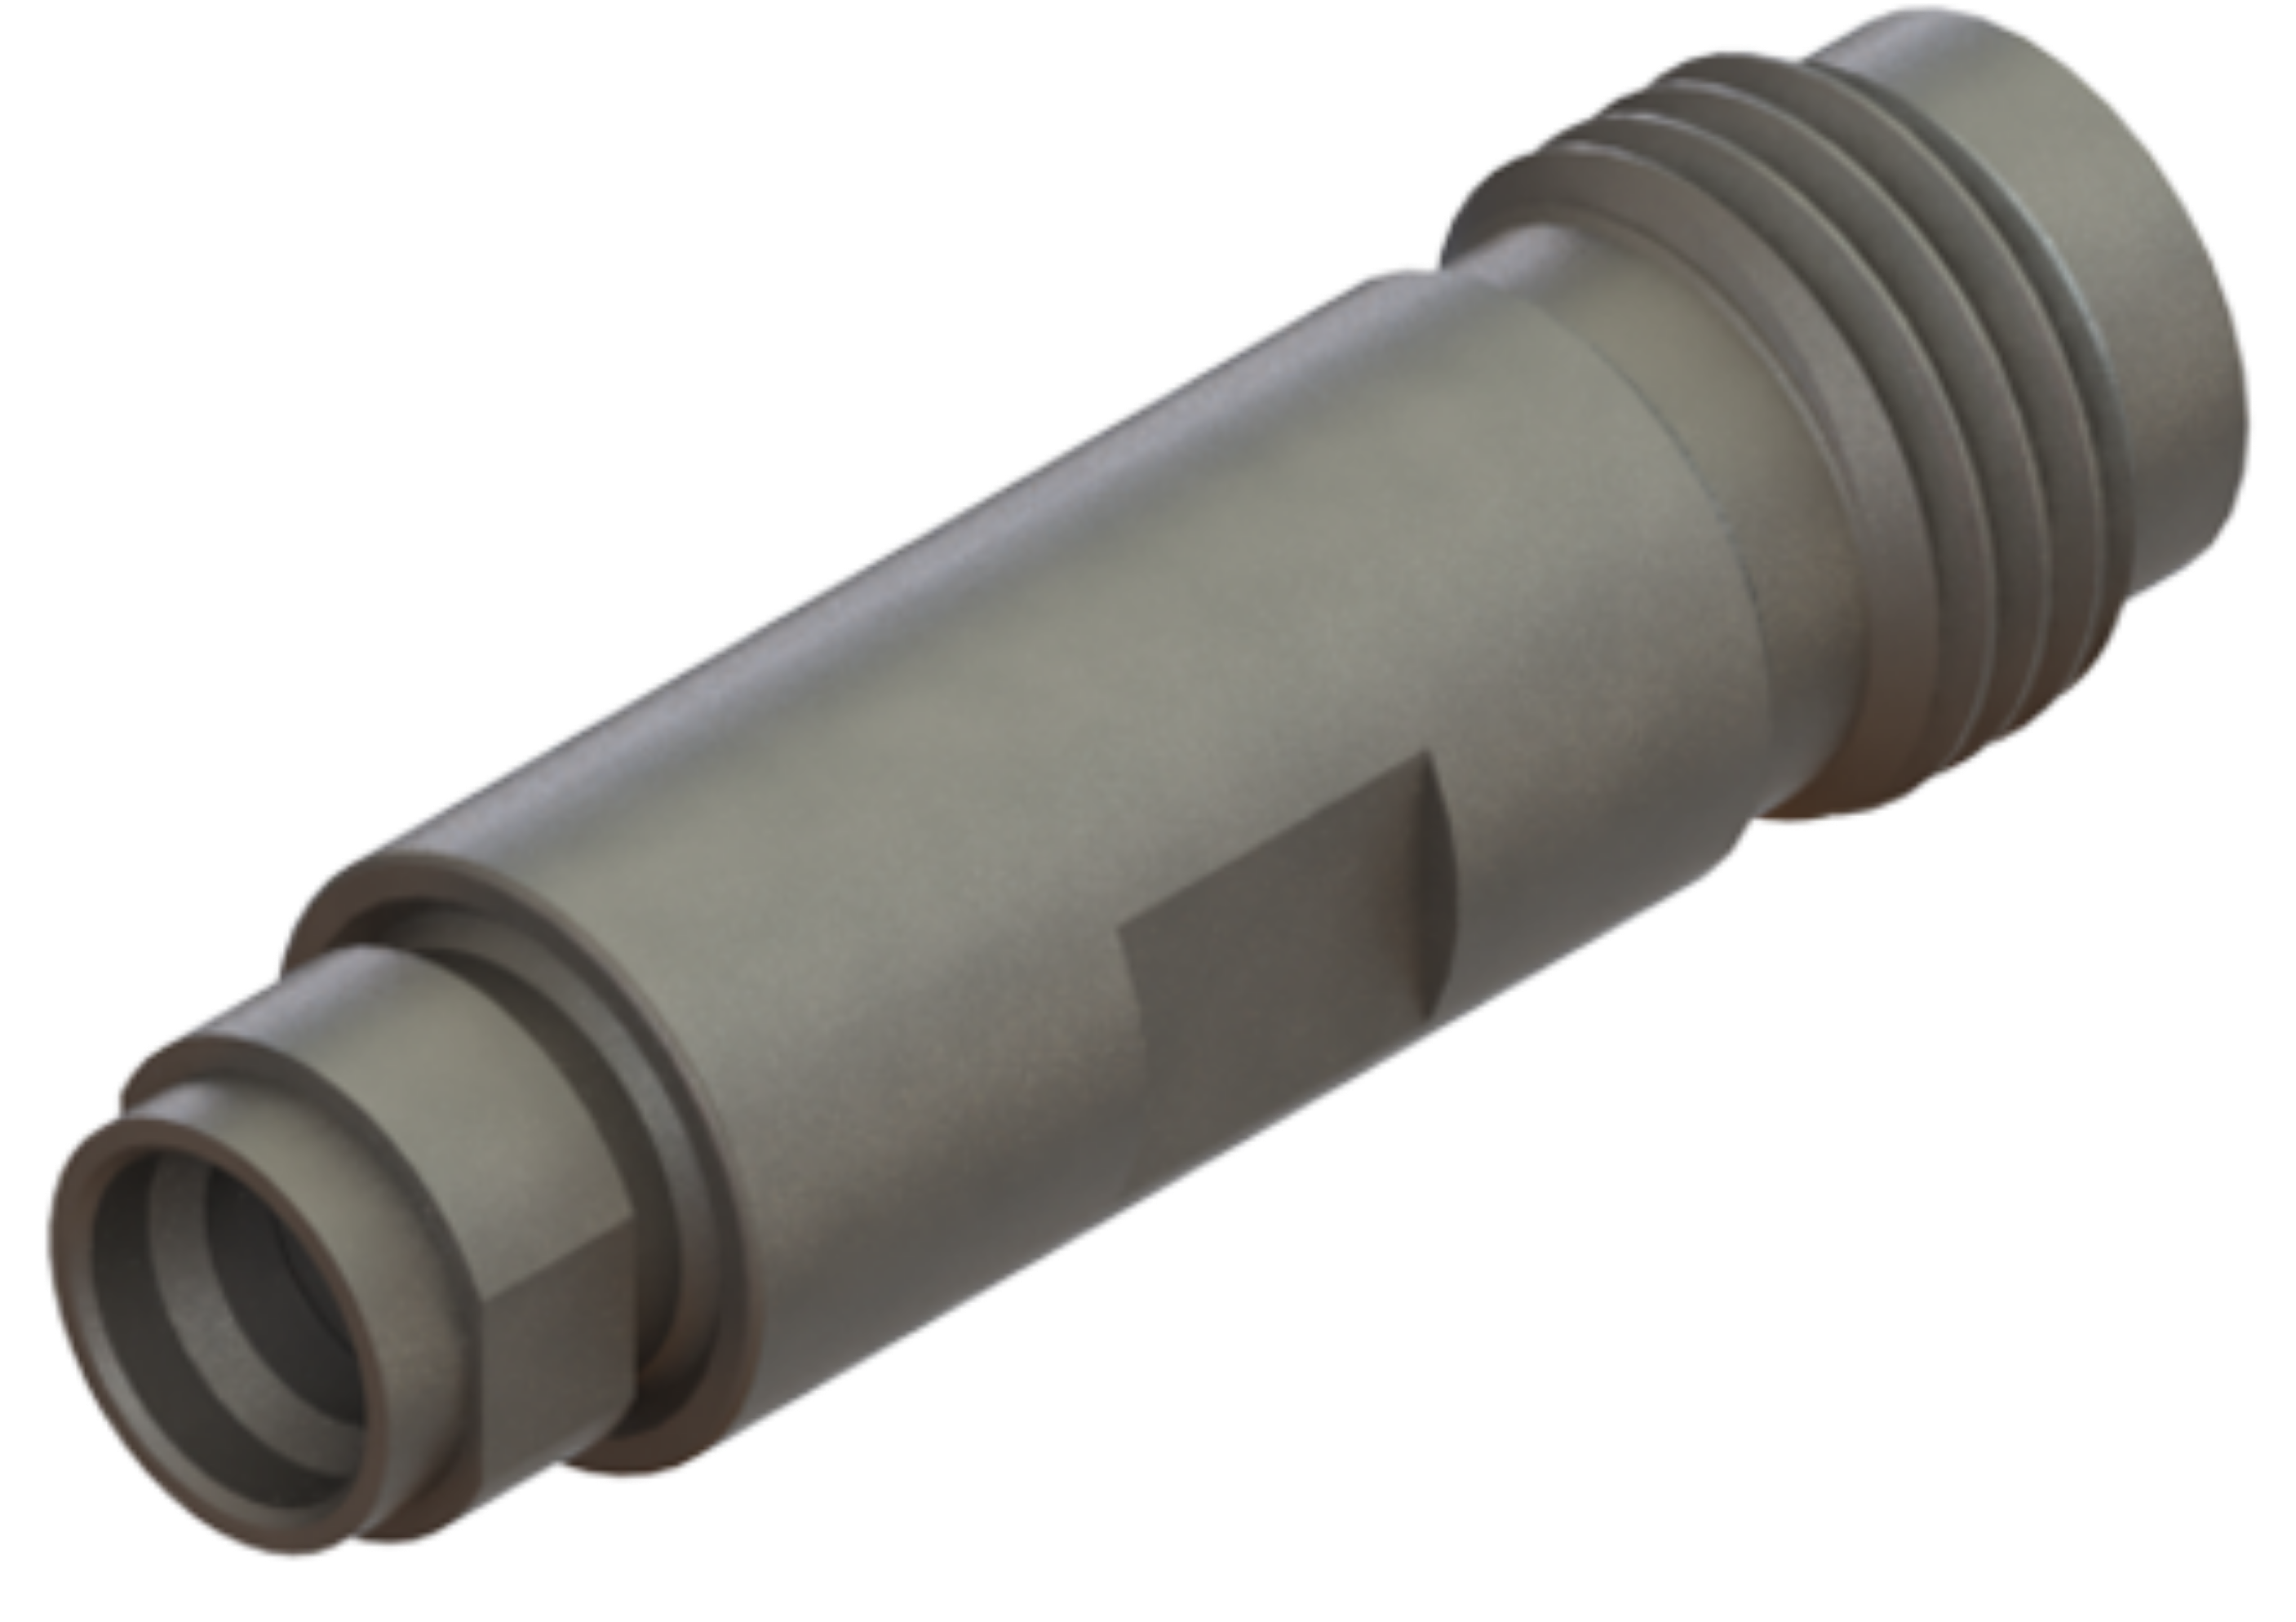 Picture of SMP Male  to 2.4mm Female Adapter, LD